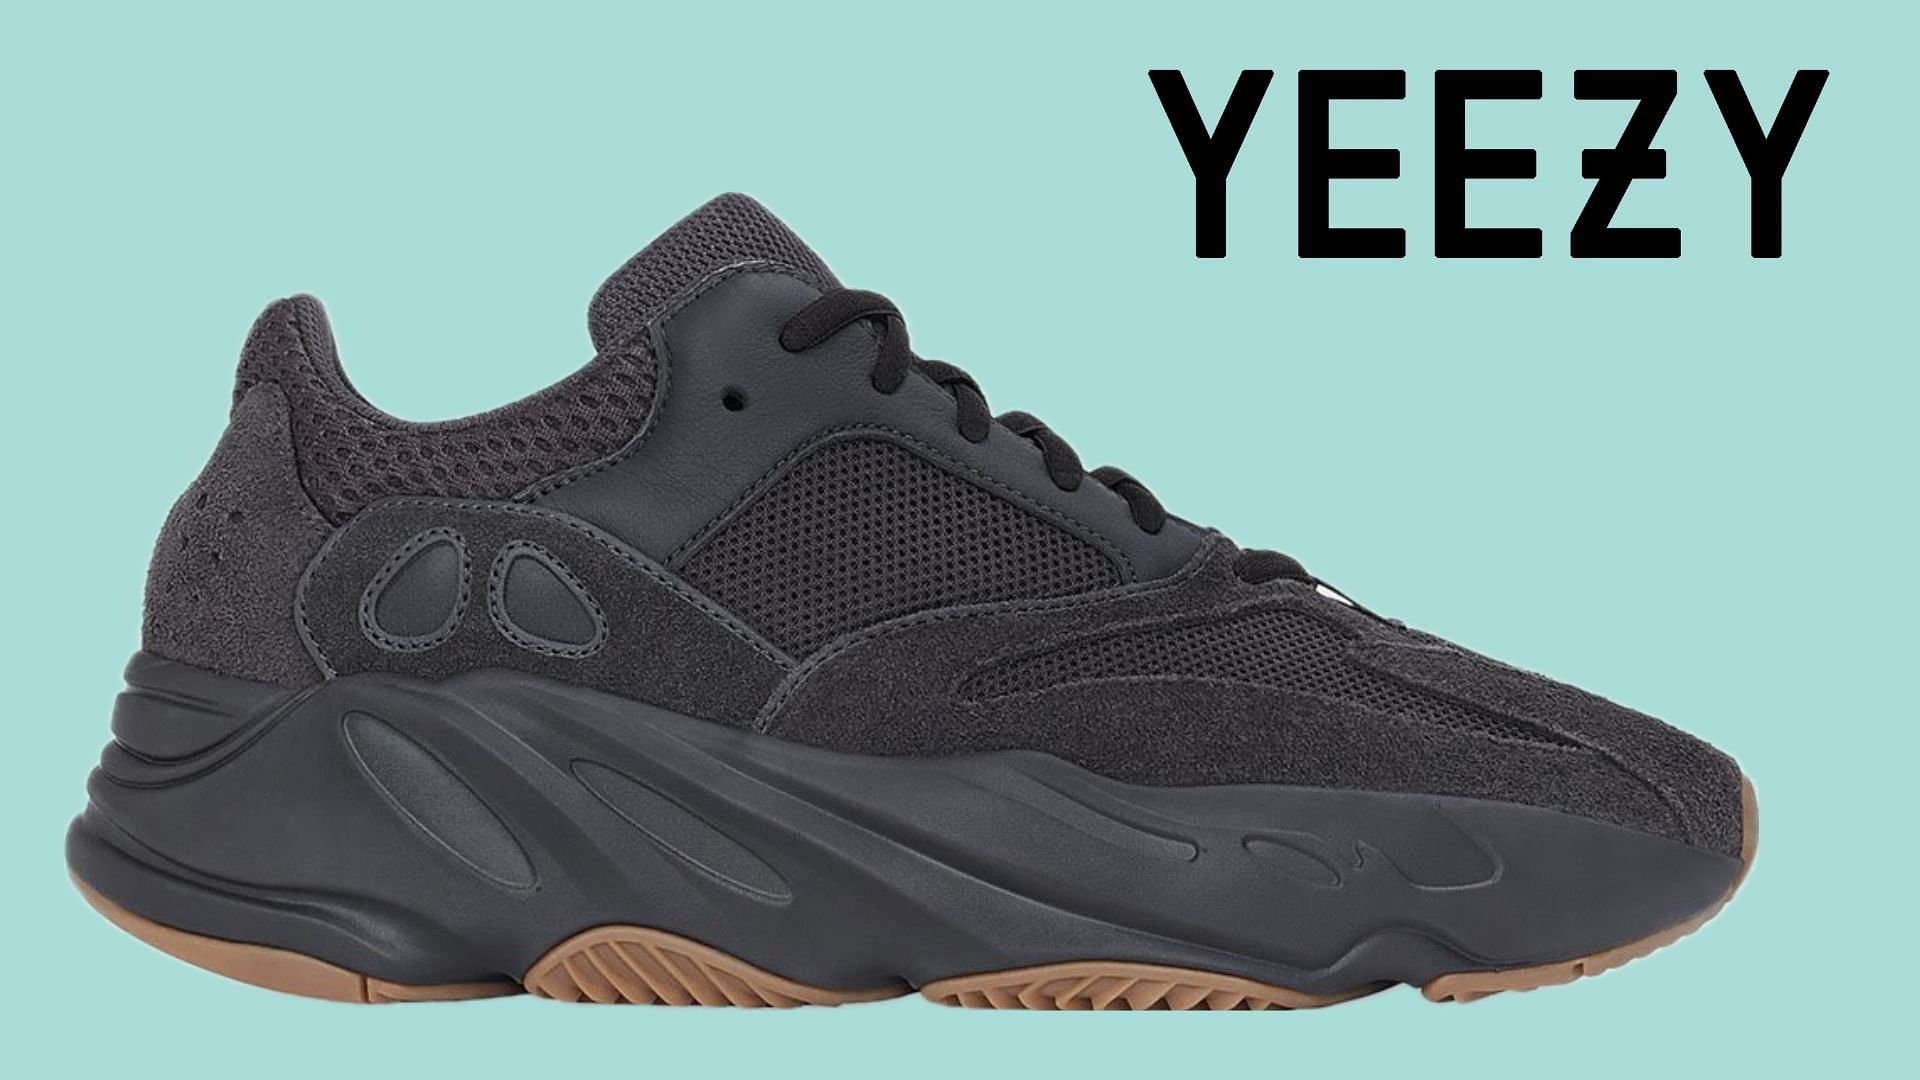 Yeezy 700: Adidas Yeezy 700 “Utility Black” shoes: Where to get, price ...